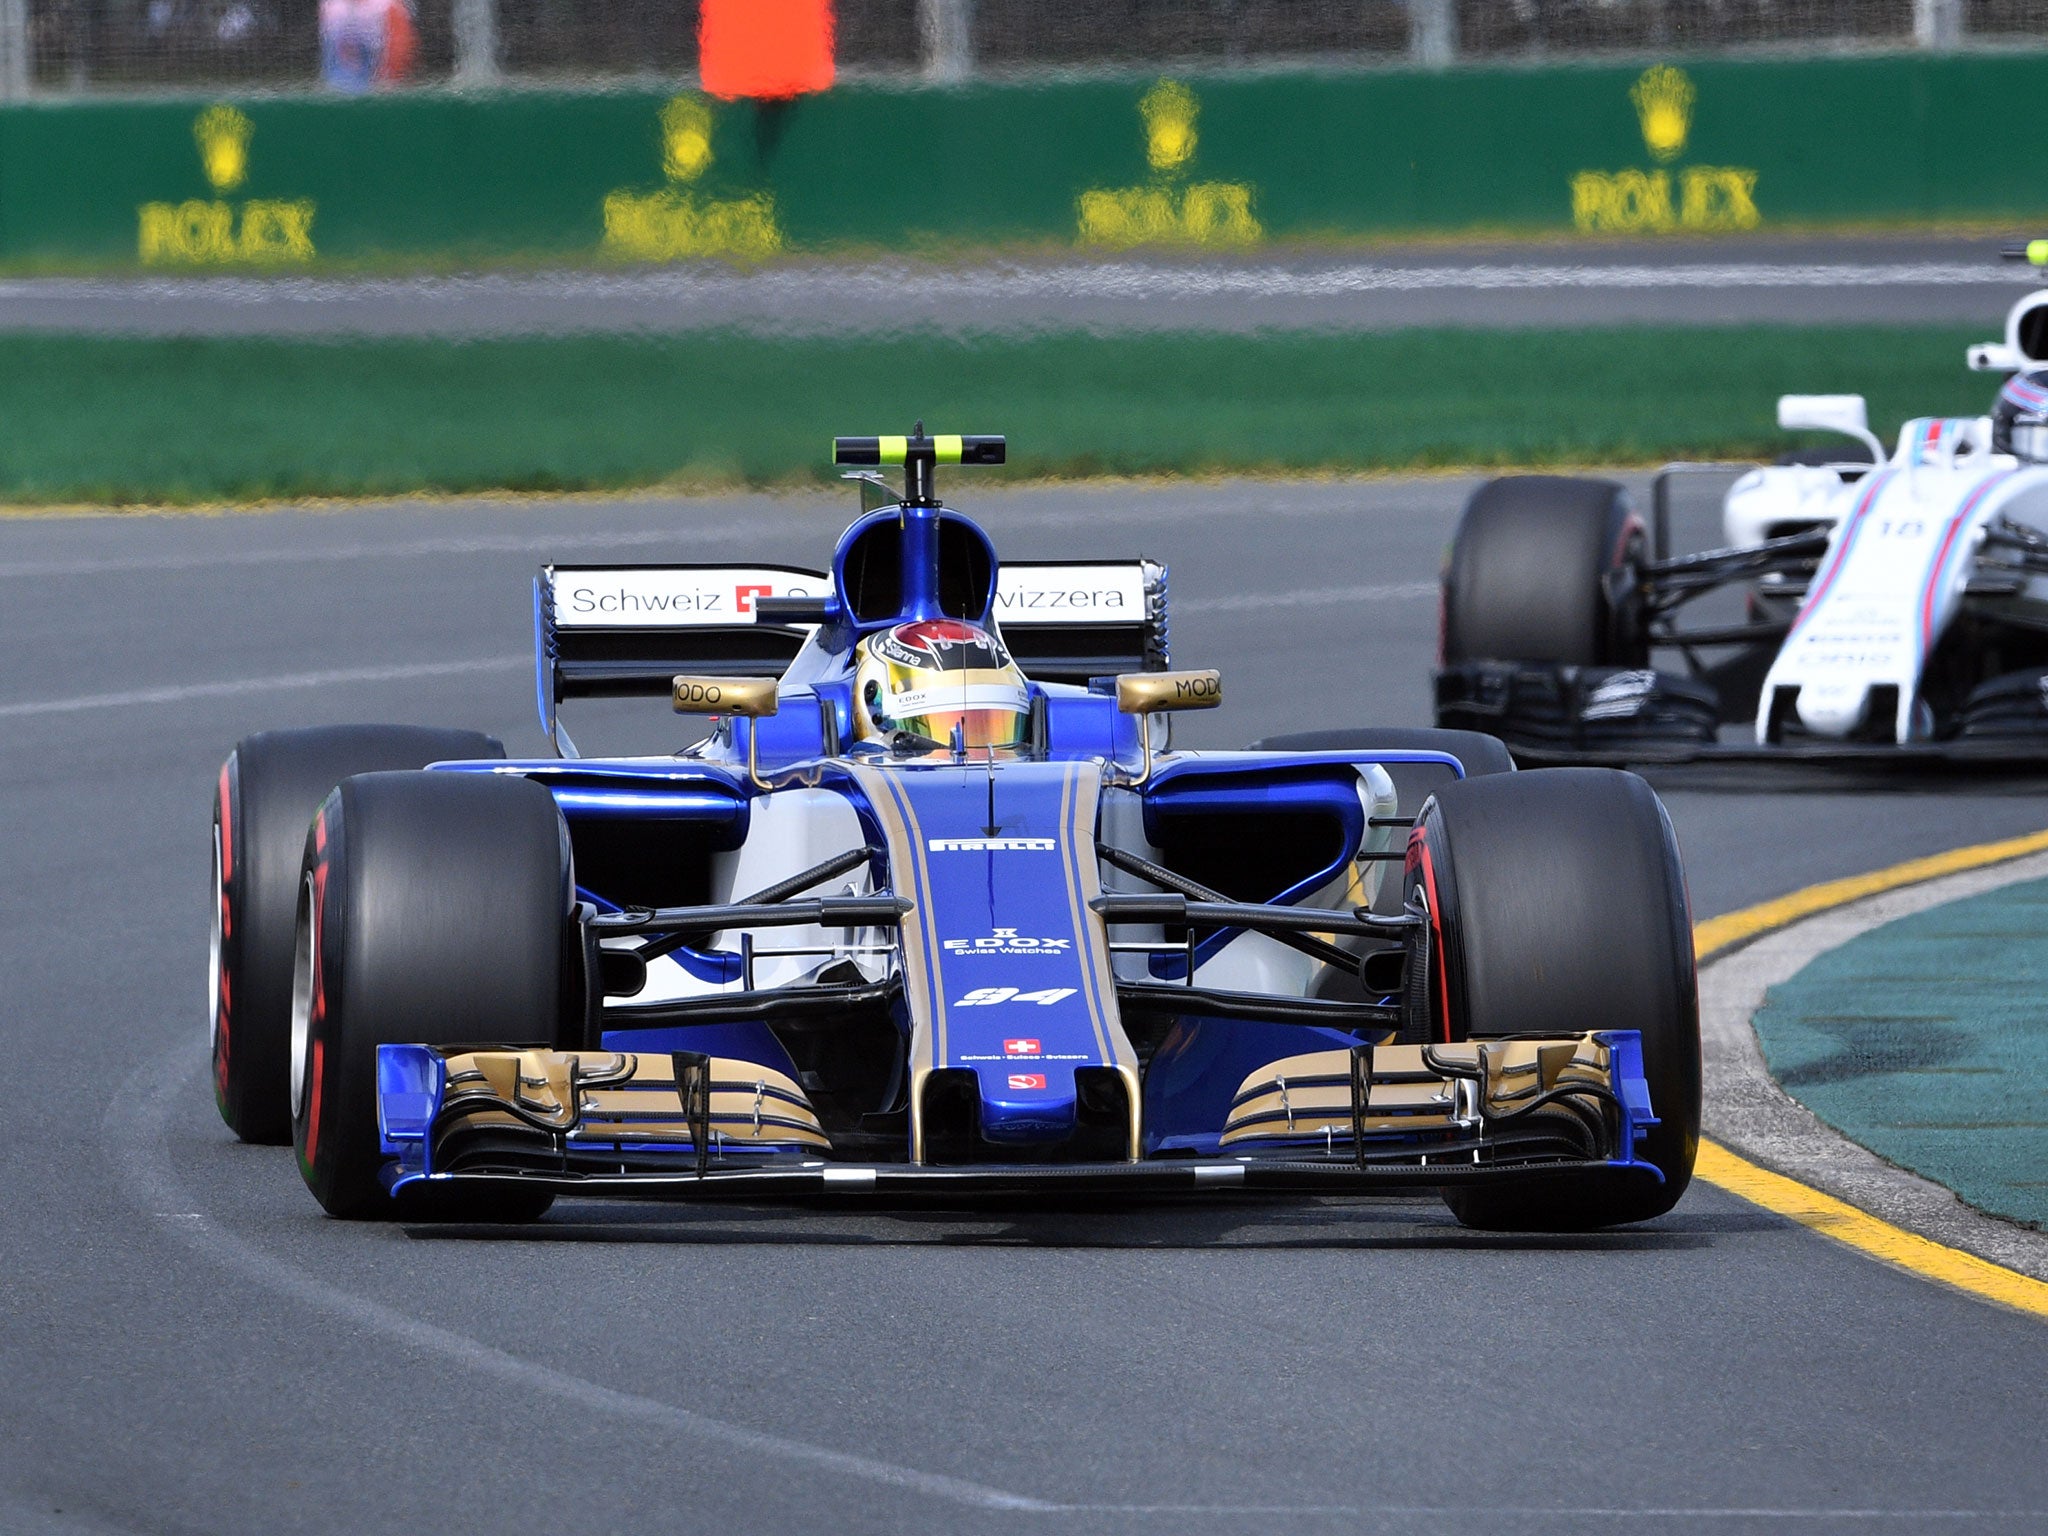 Wehrlein completed Friday's two sessions before withdrawing from the weekend